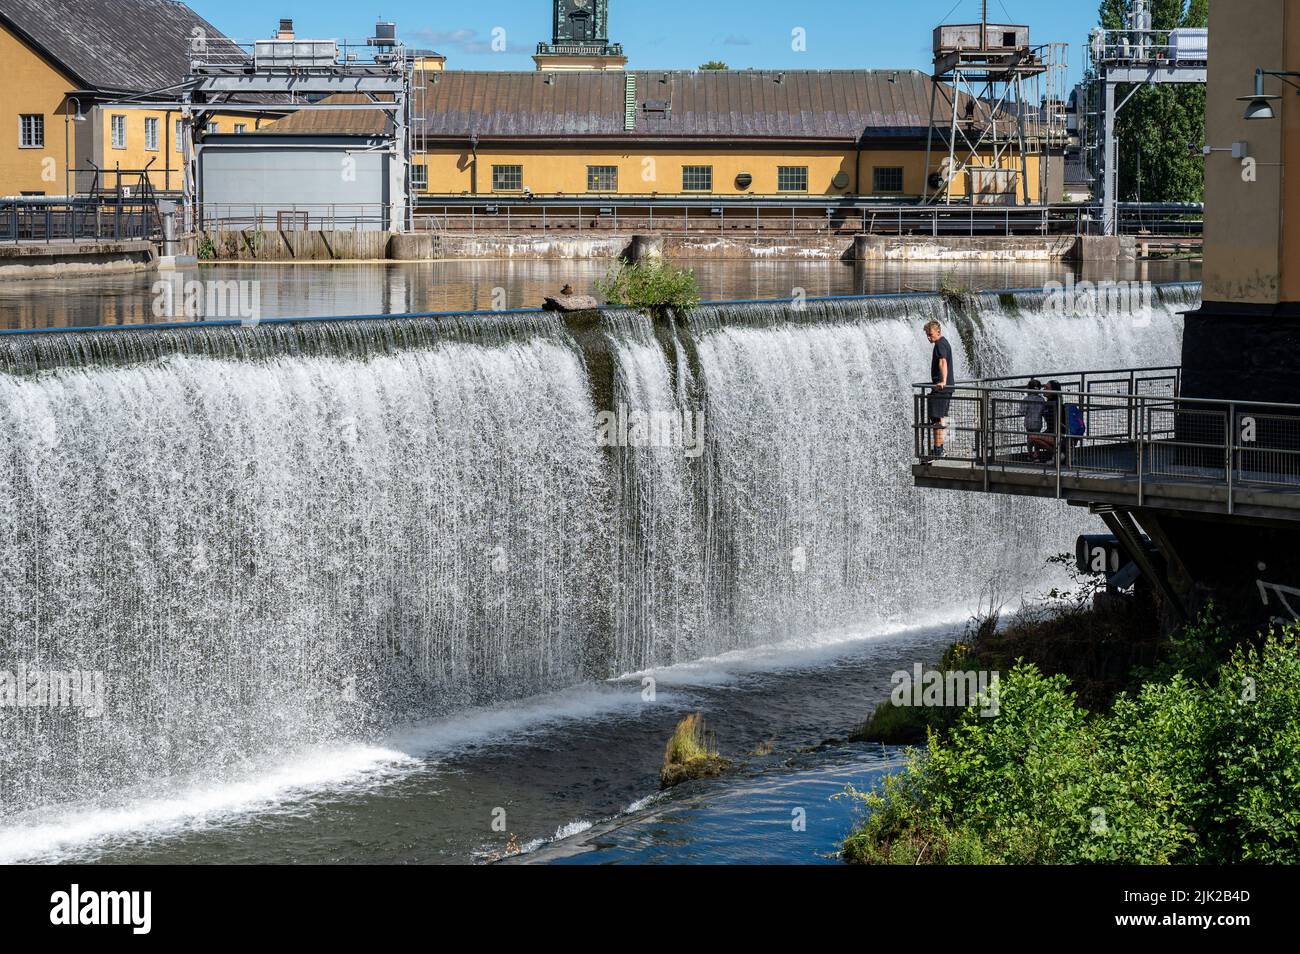 The old industrial landscape and Motala river in Norrkoping. Norrkoping is a historic industrial town in Sweden. Stock Photo